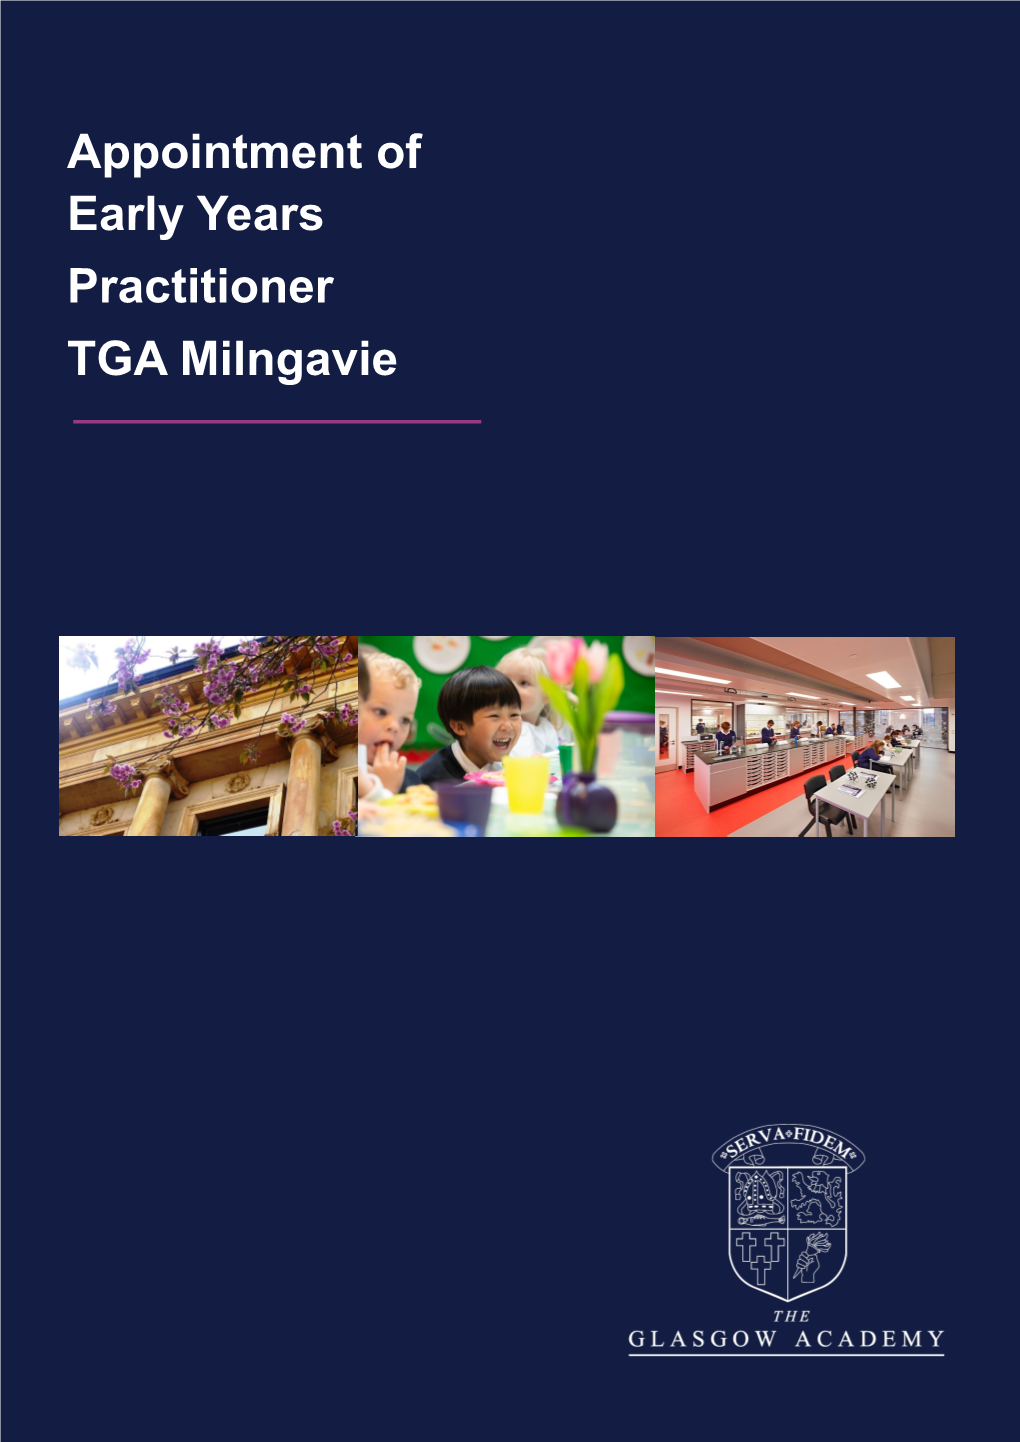 Appointment of Early Years Practitioner TGA Milngavie